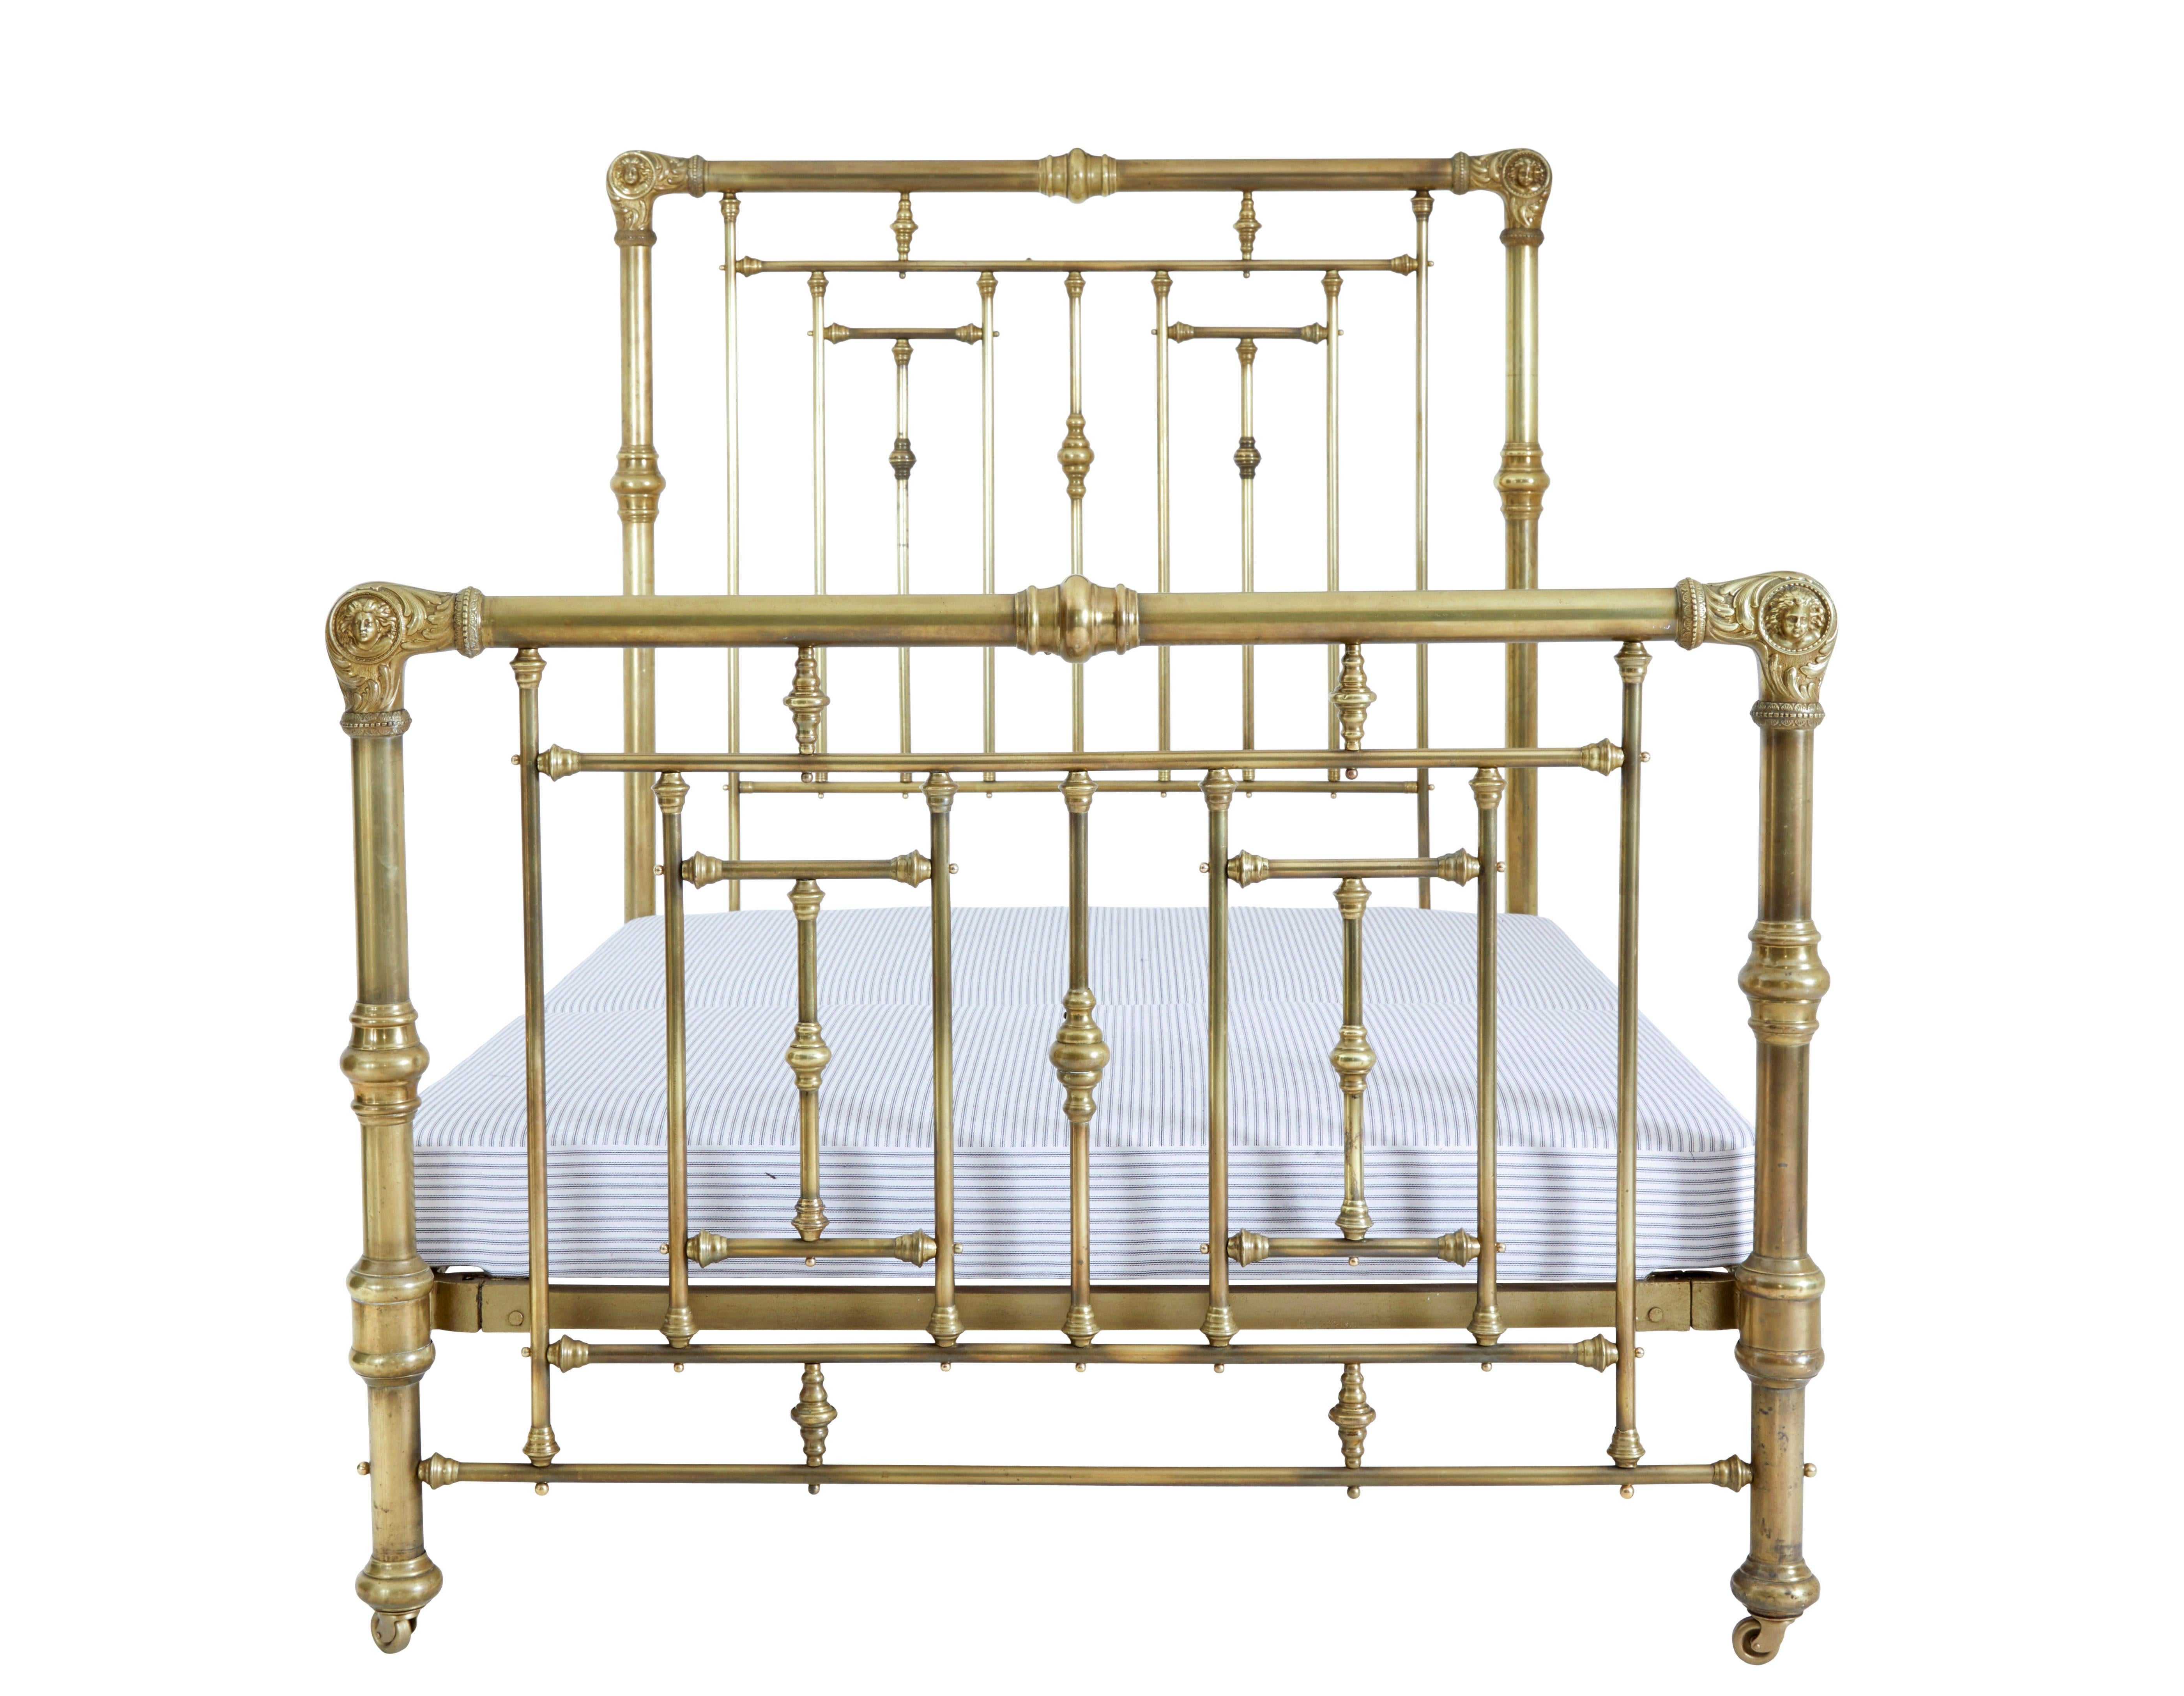 American 19th century ornate brass double bed circa 1880.

Standard double size, with a mattress area of 55